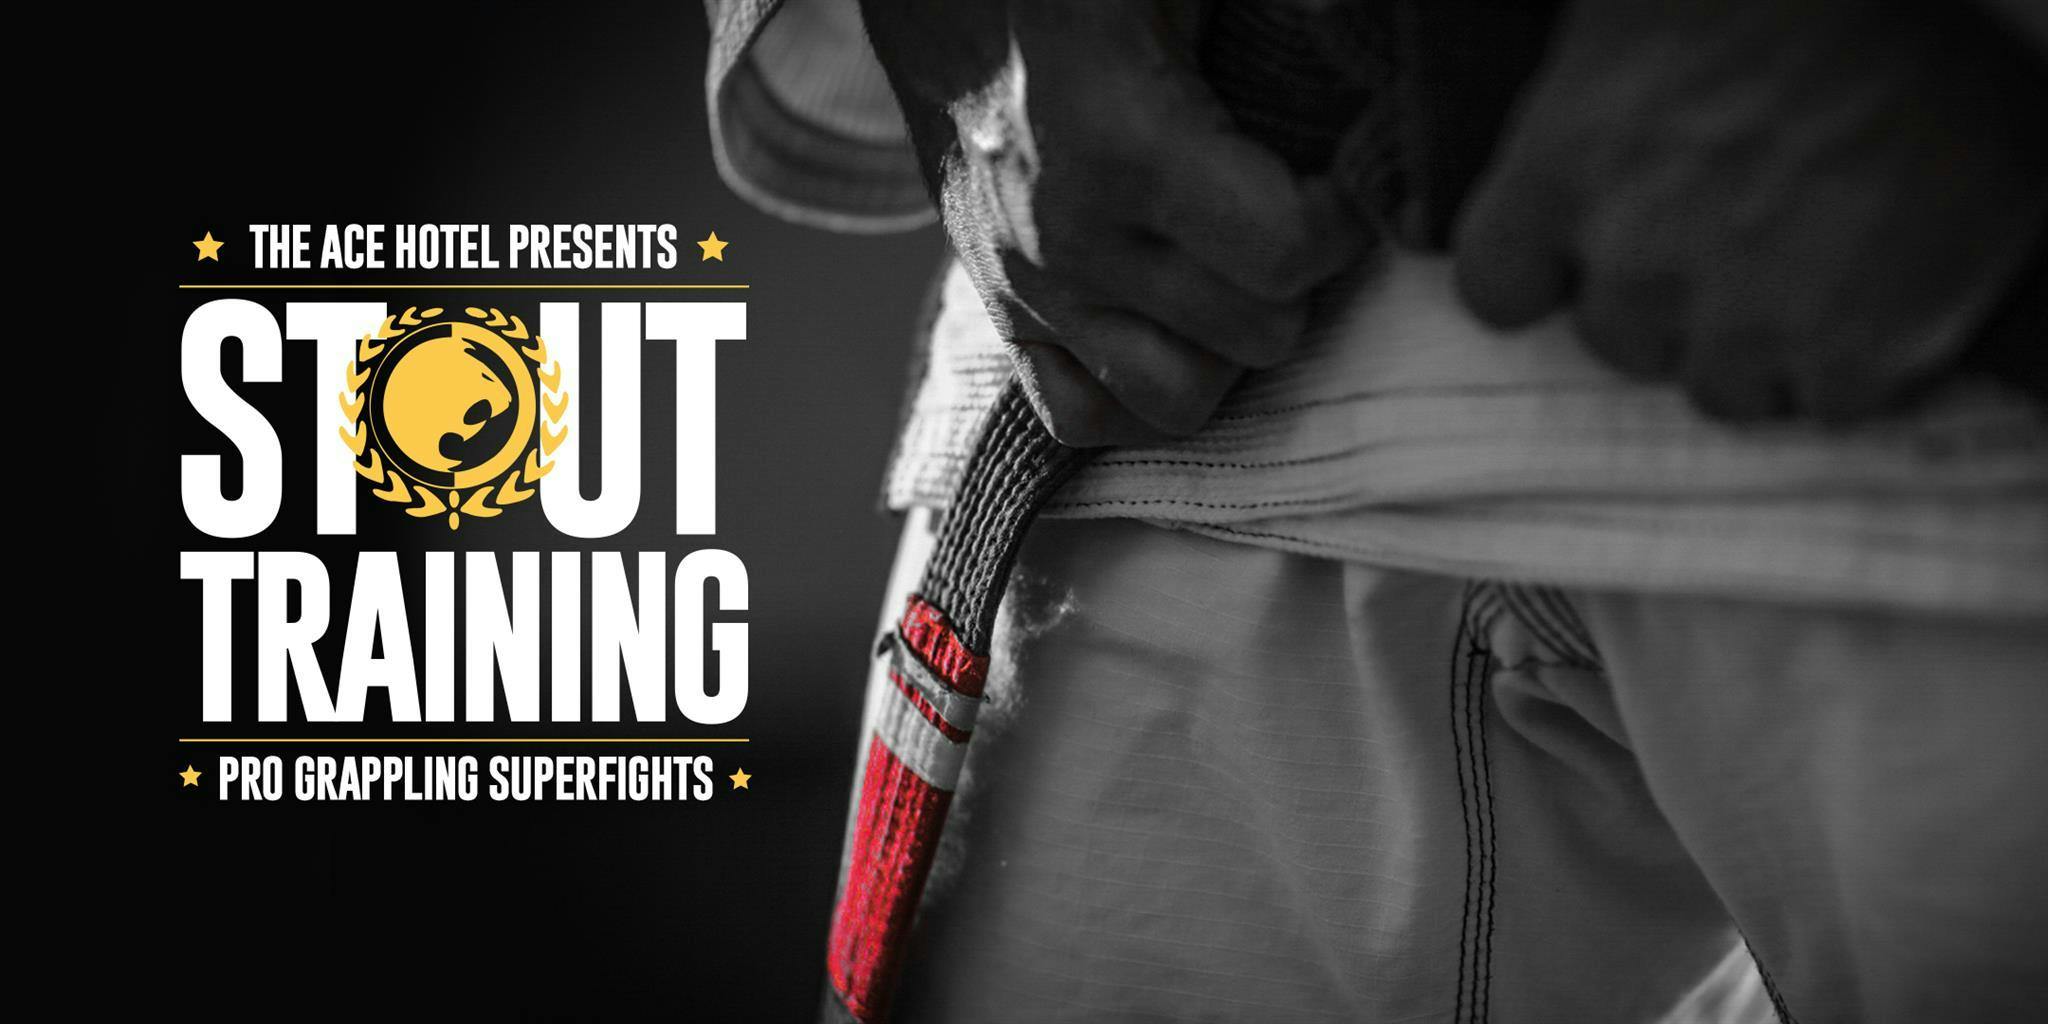 Stout Training Pro Grappling Superfights